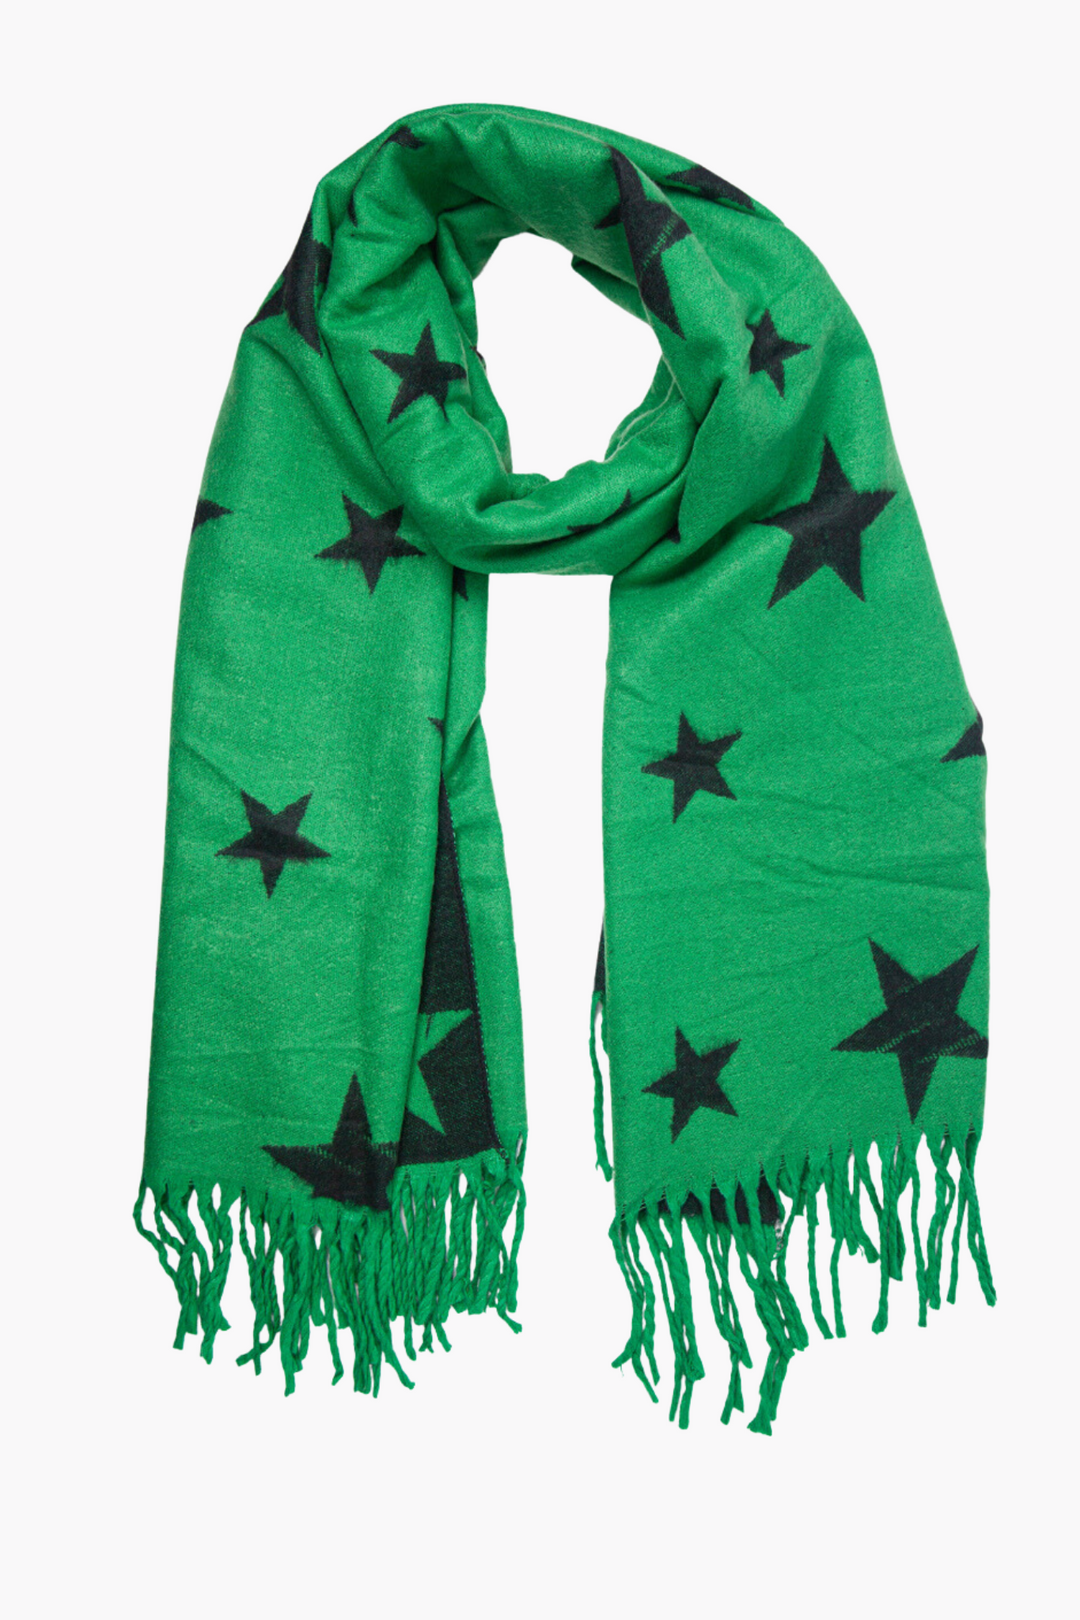 Green Heavyweight Scarf in Scattered Star Print